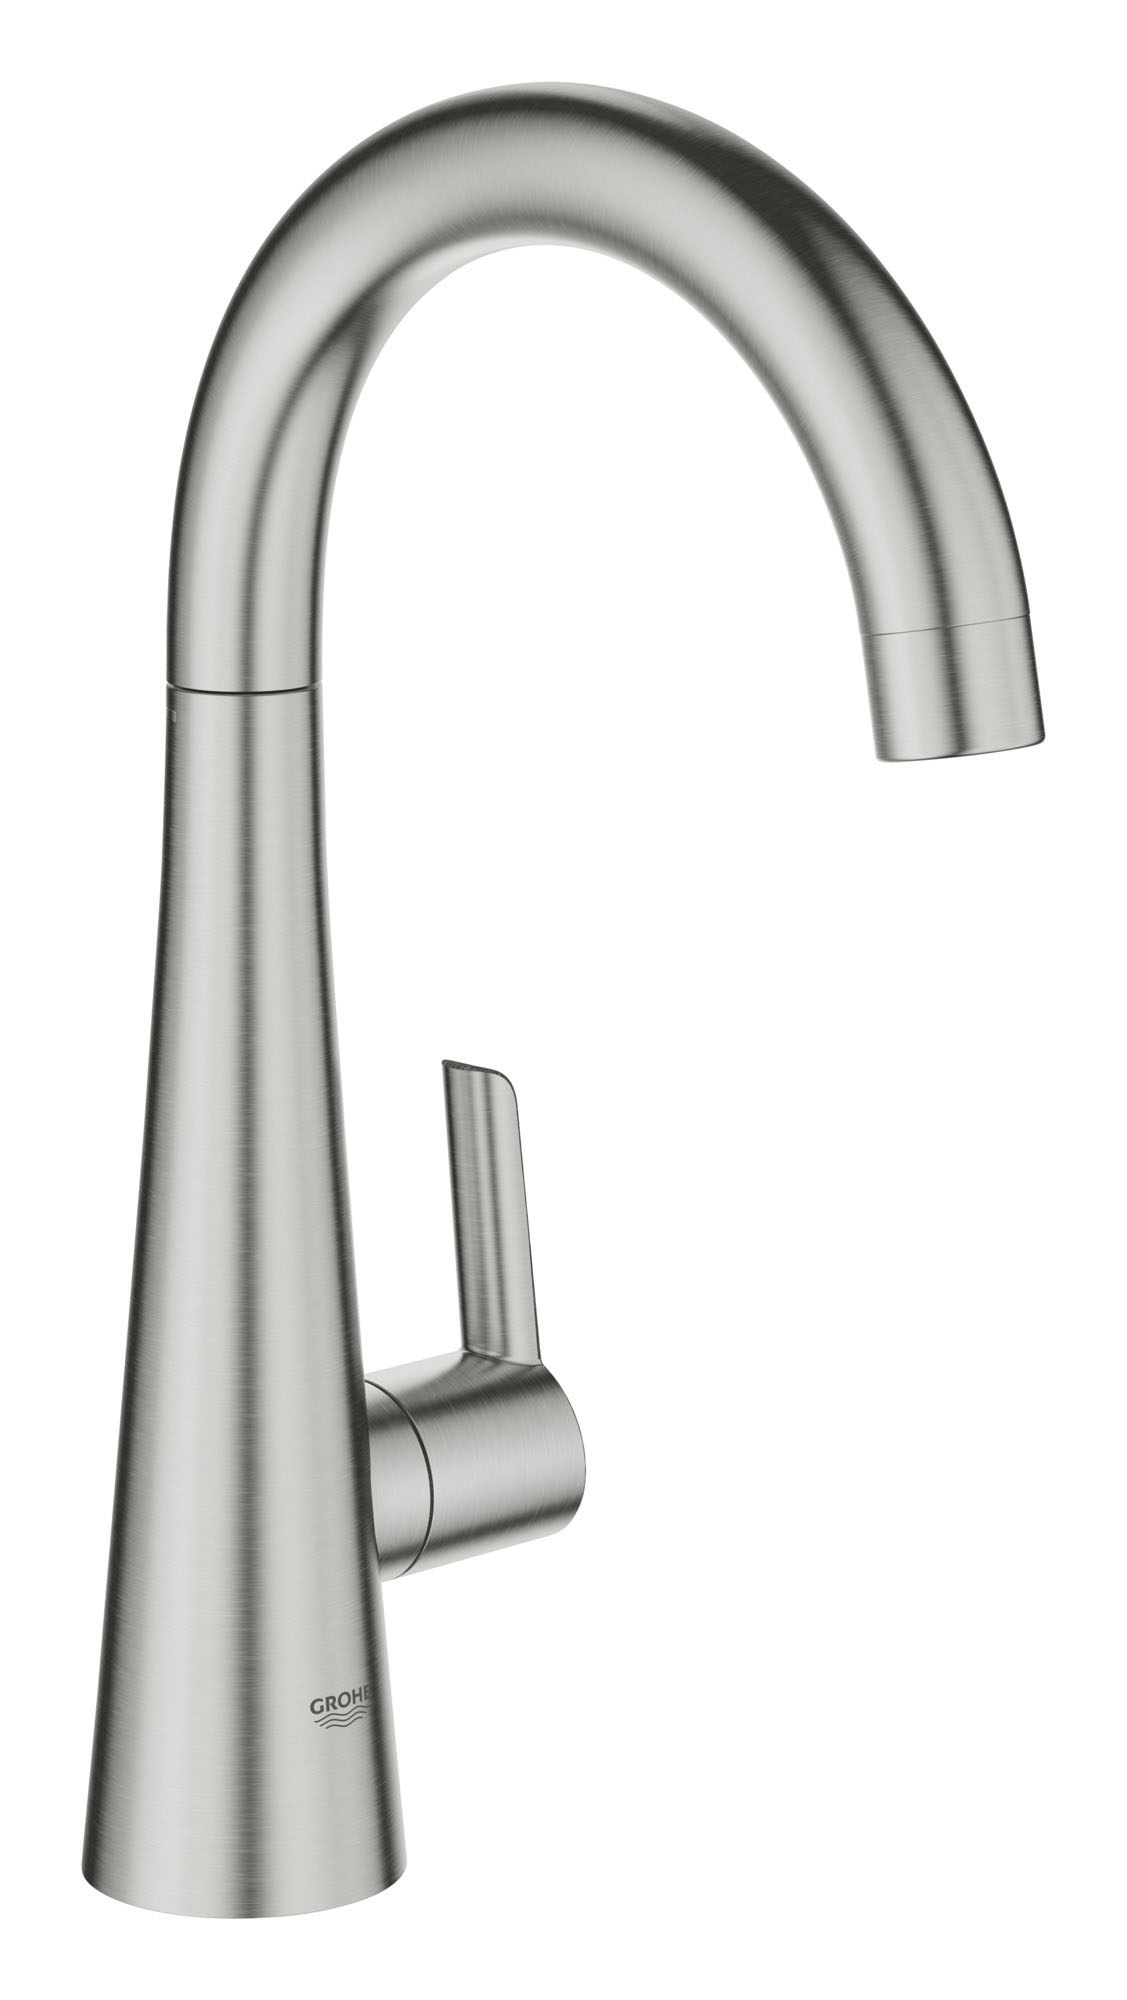 DIY: Can I install a mixer faucet when I have only cold water input?